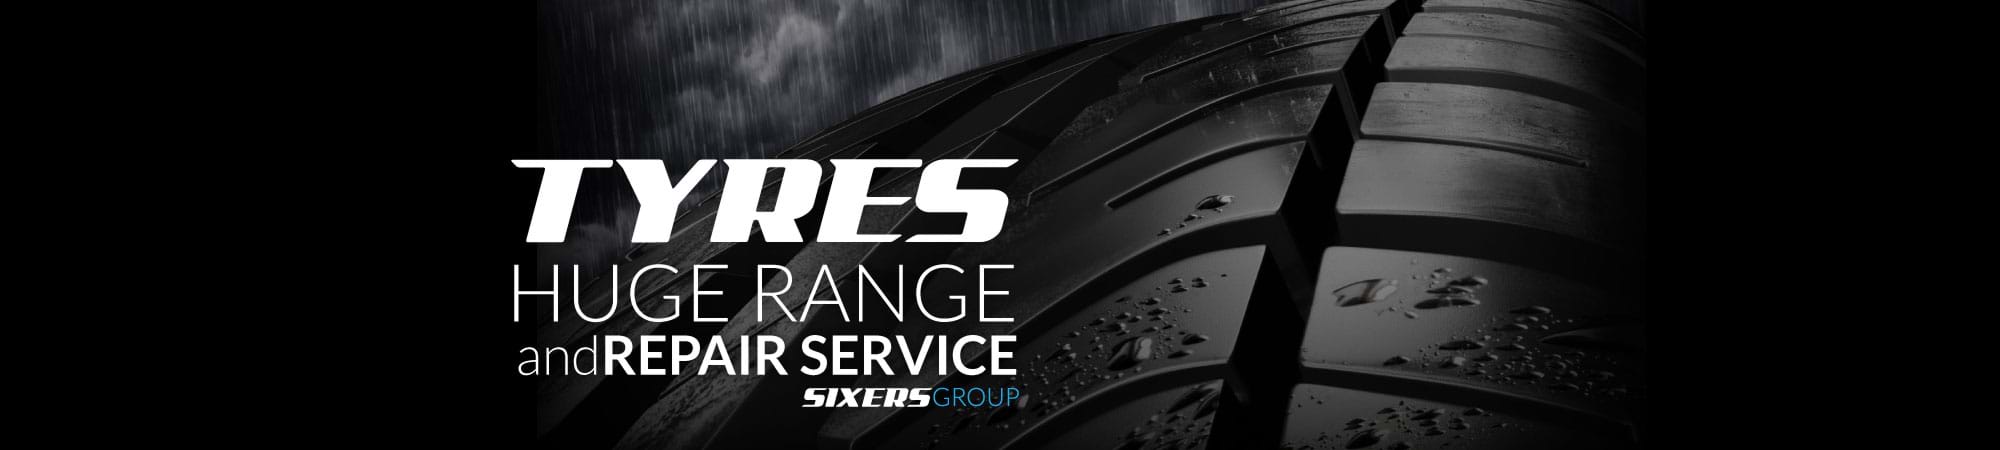 Sixers Group Tyres, Huge range and repair service